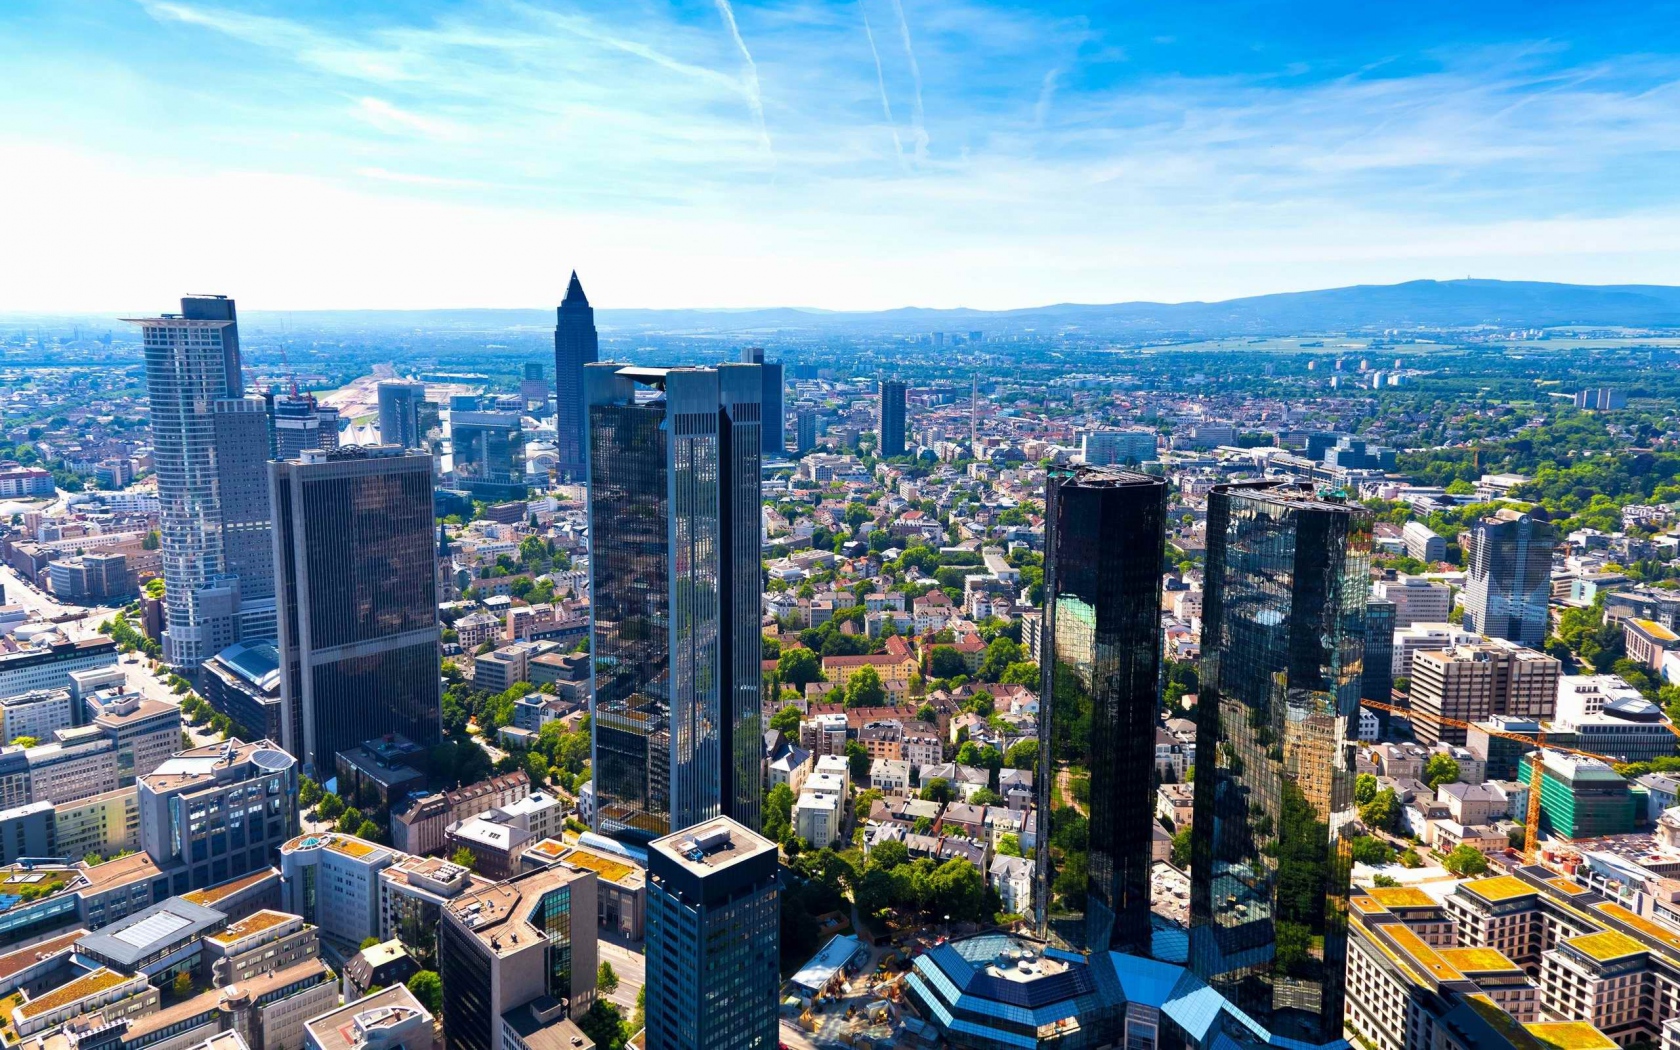 germany_frankfurt_am_main_metropolis_panorama_architecture_tall_buildings_houses_streets_traffic_blue_sky_warm_sunny_day_clouds_horizon_680x1050